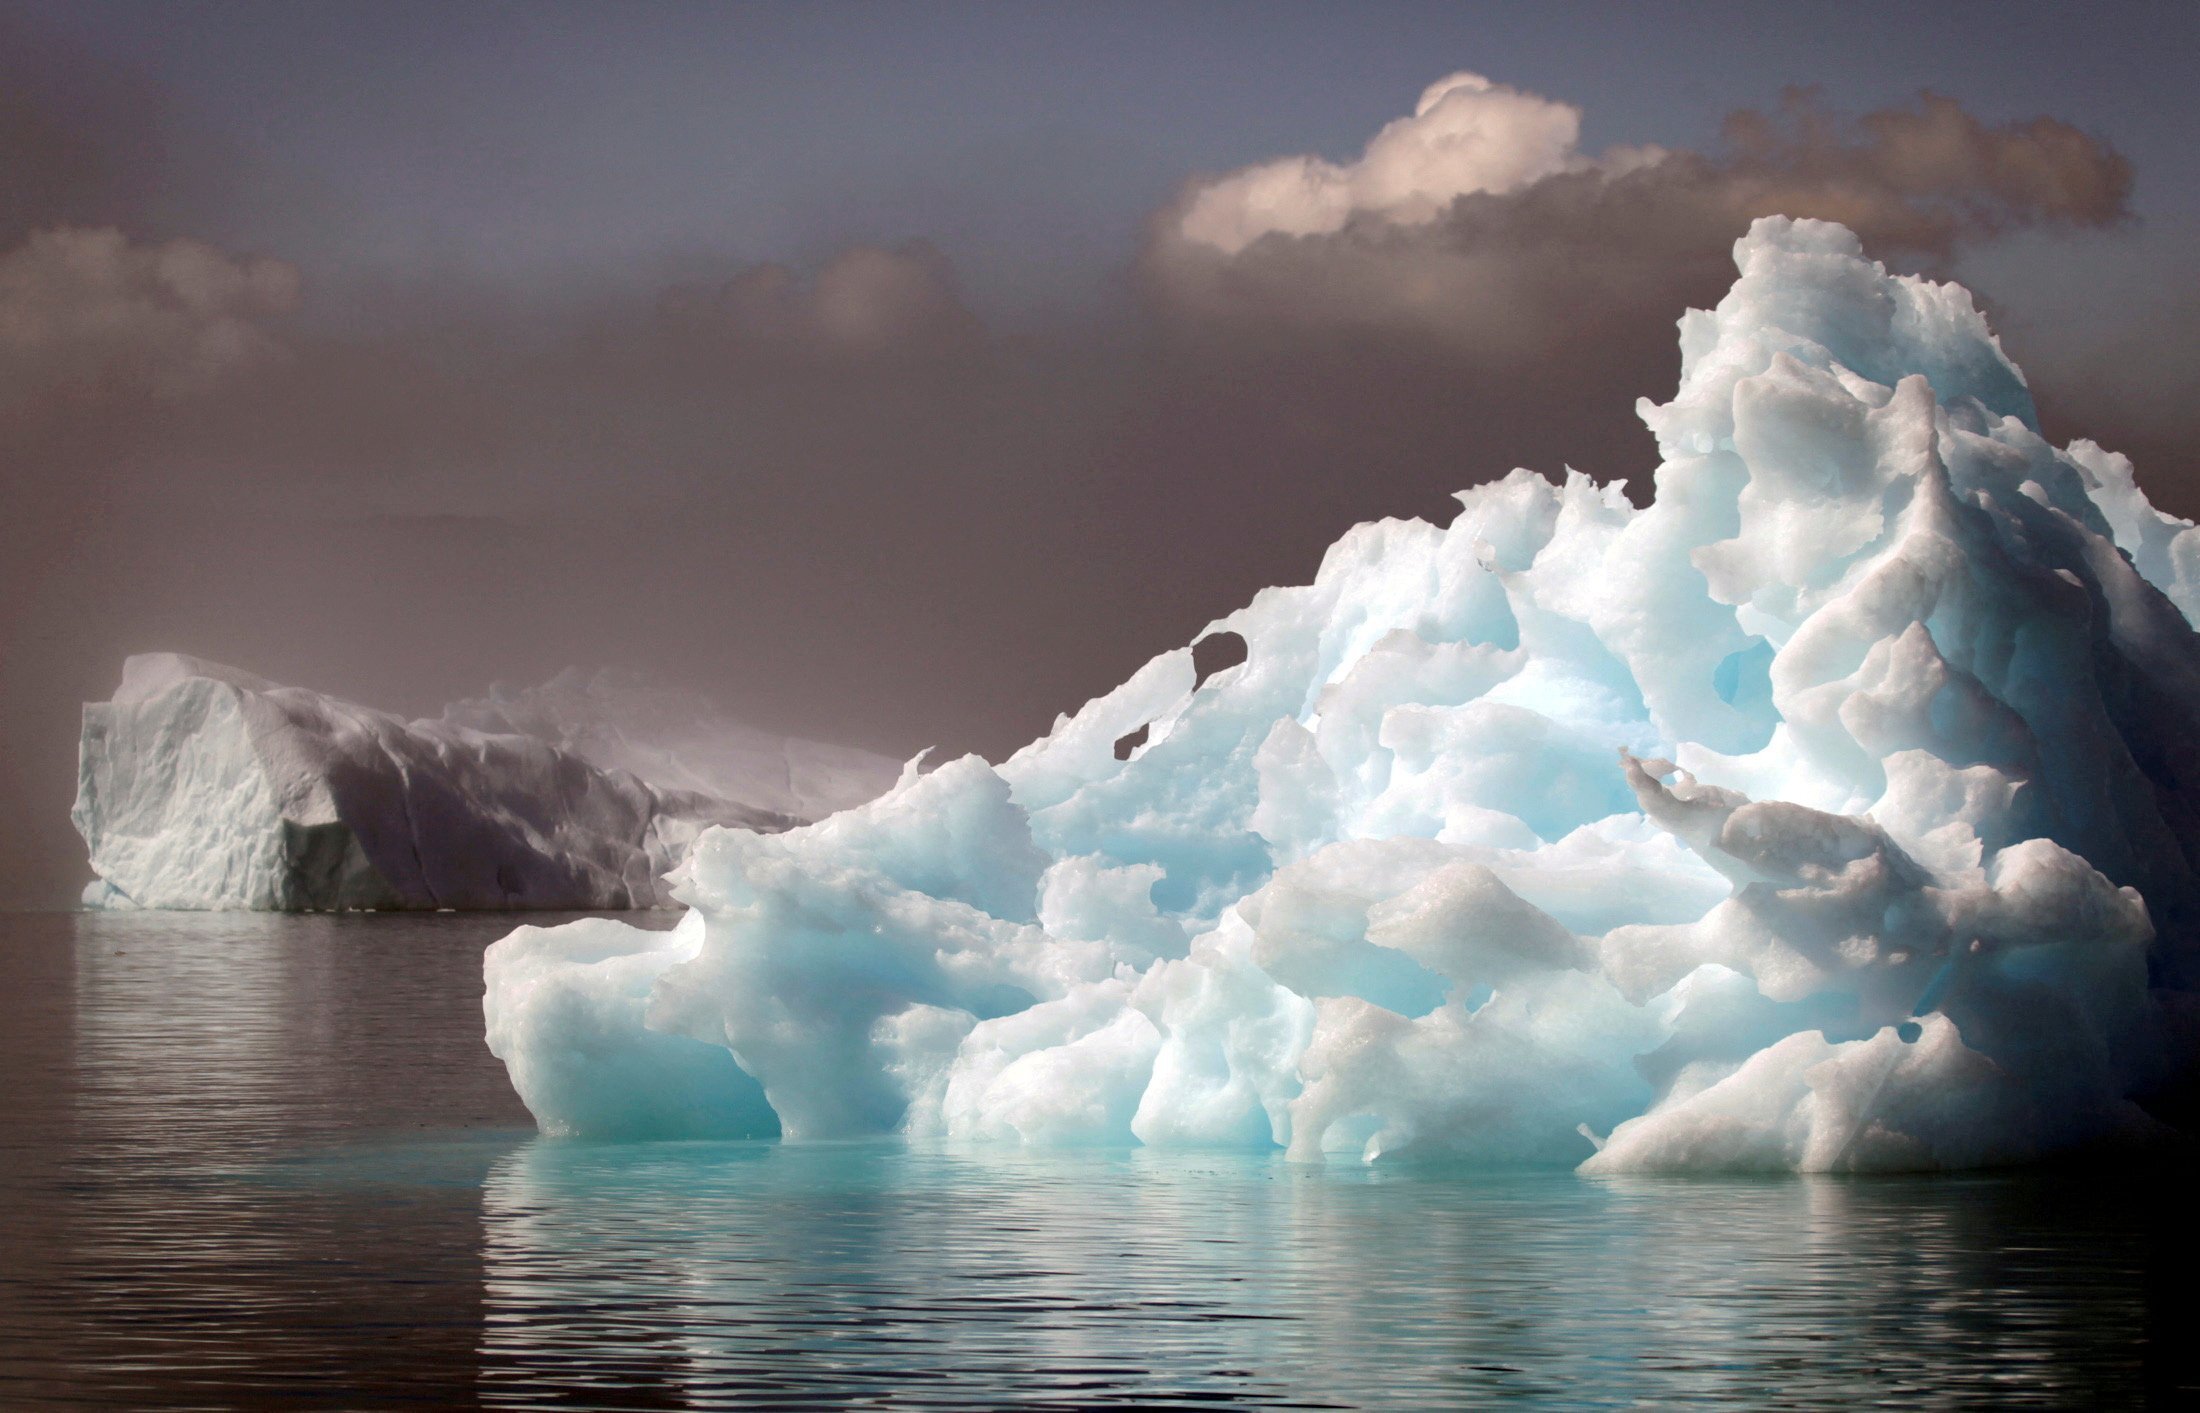 Icebergs in a fjord in Greenland, which Denmark says is an espionage target. Photo: Reuters